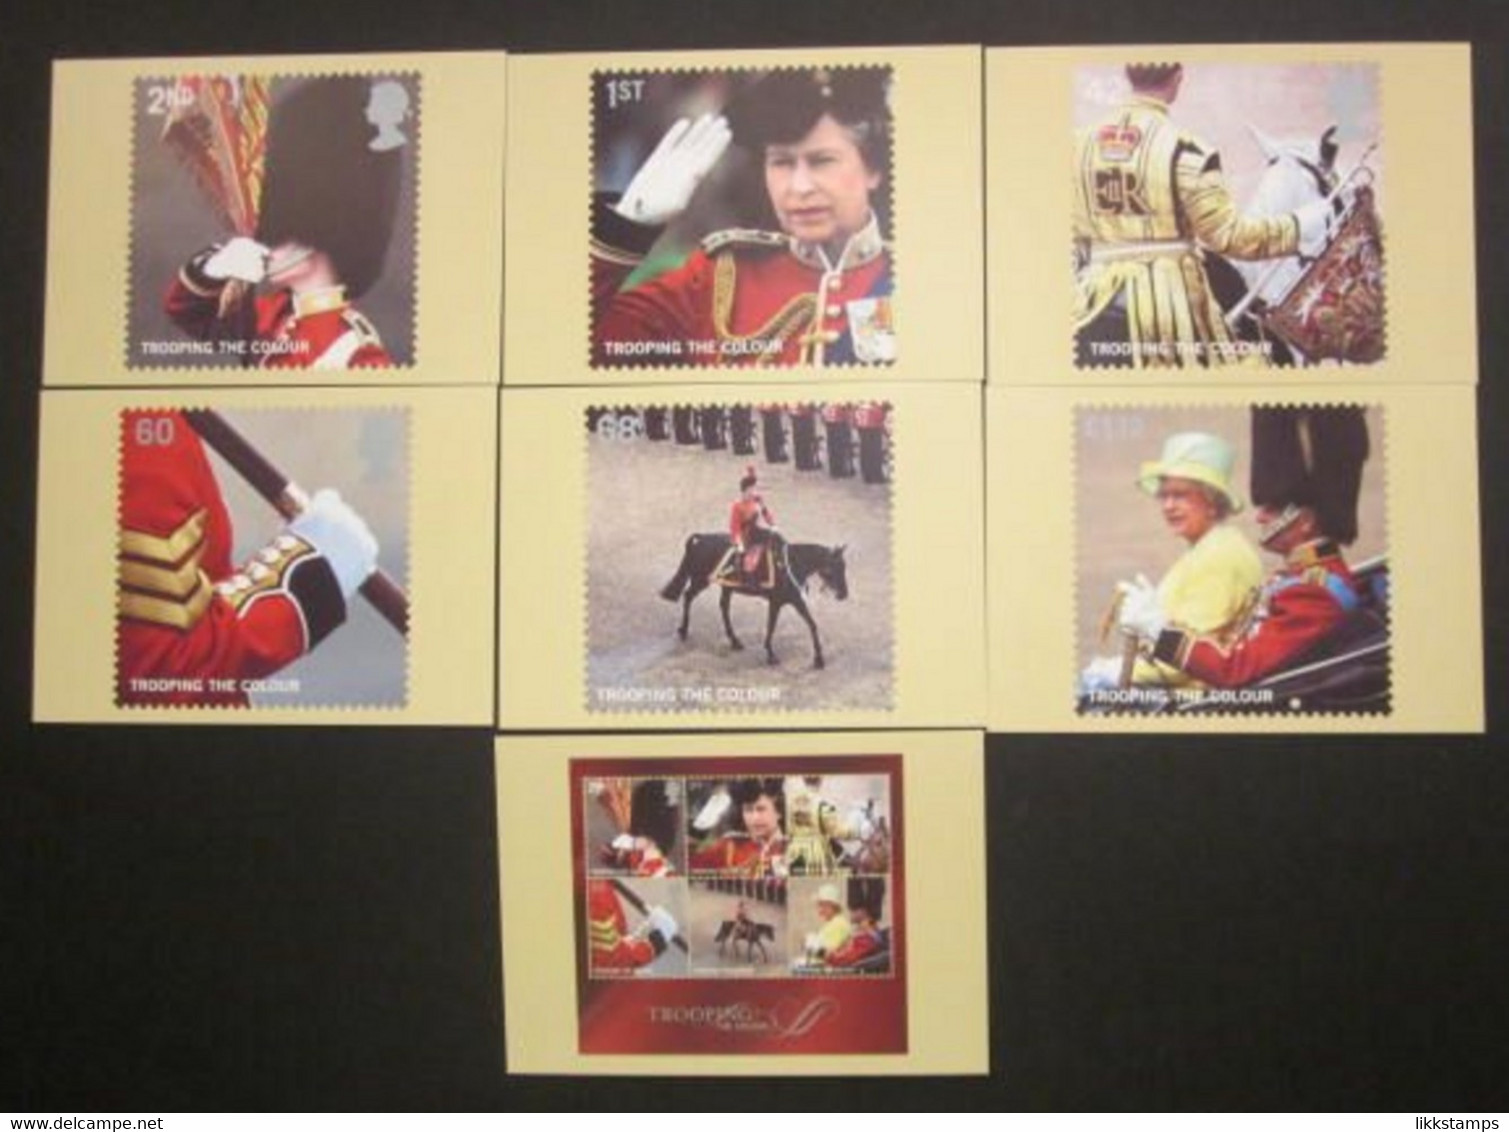 2005 TROOPING THE COLOUR P.H.Q. CARDS UNUSED, ISSUE No. 276 (B) #00839 - PHQ Cards